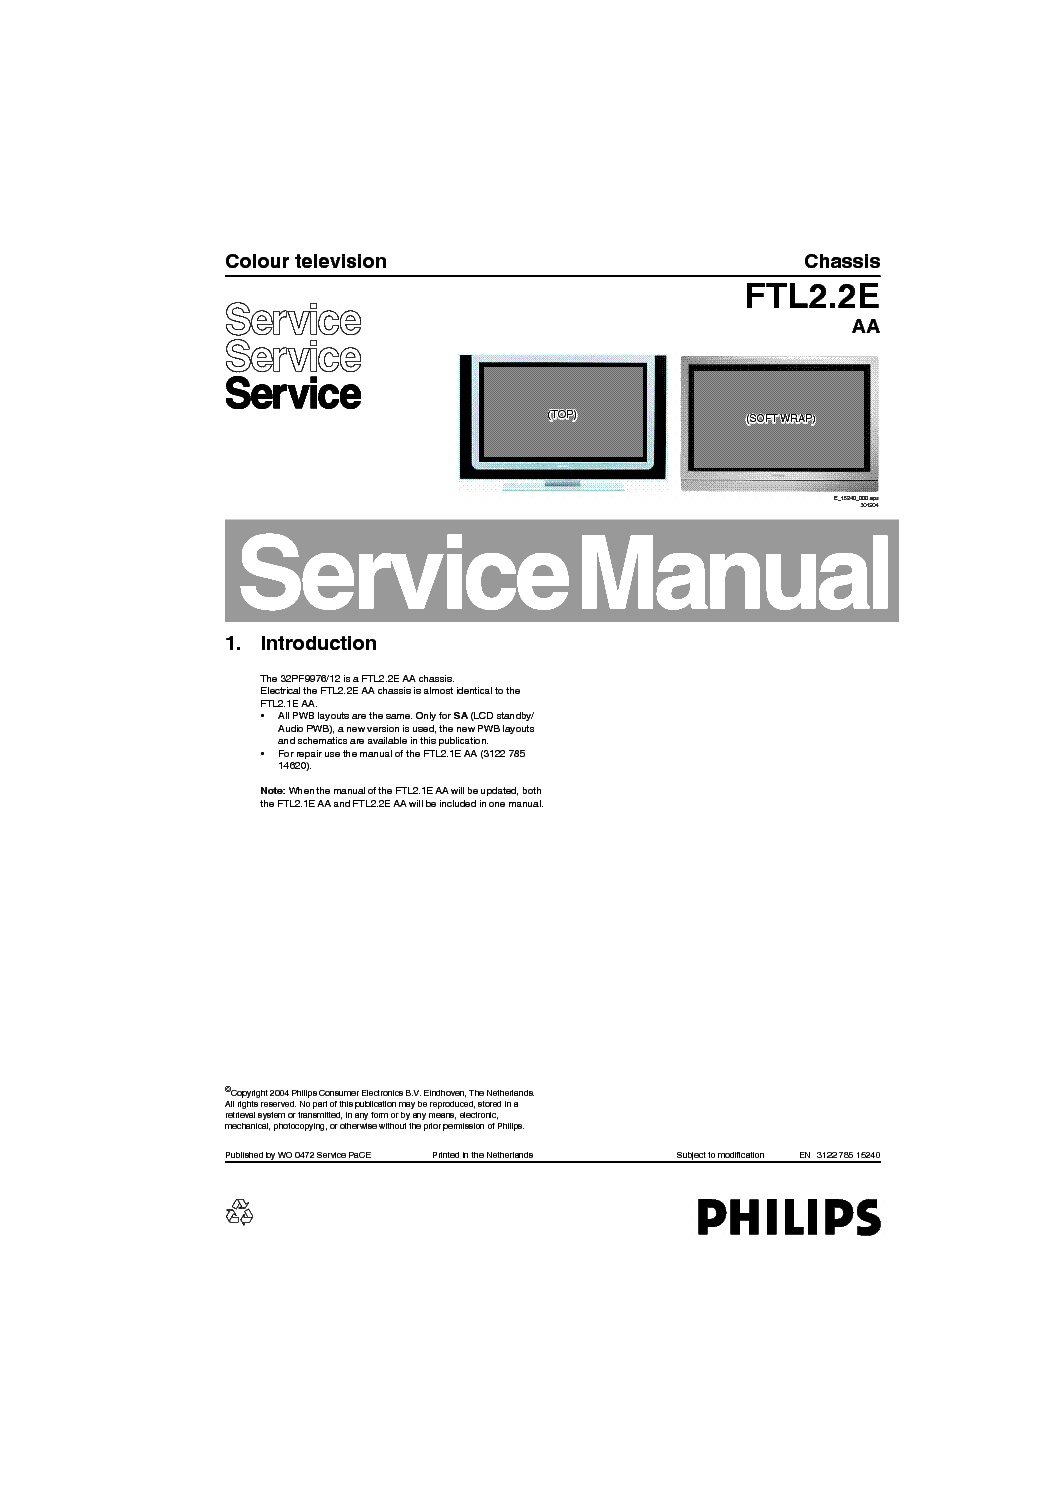 PHILIPS CHASSIS FTL2.2E-AA 32PF9976-12 SM service manual (1st page)